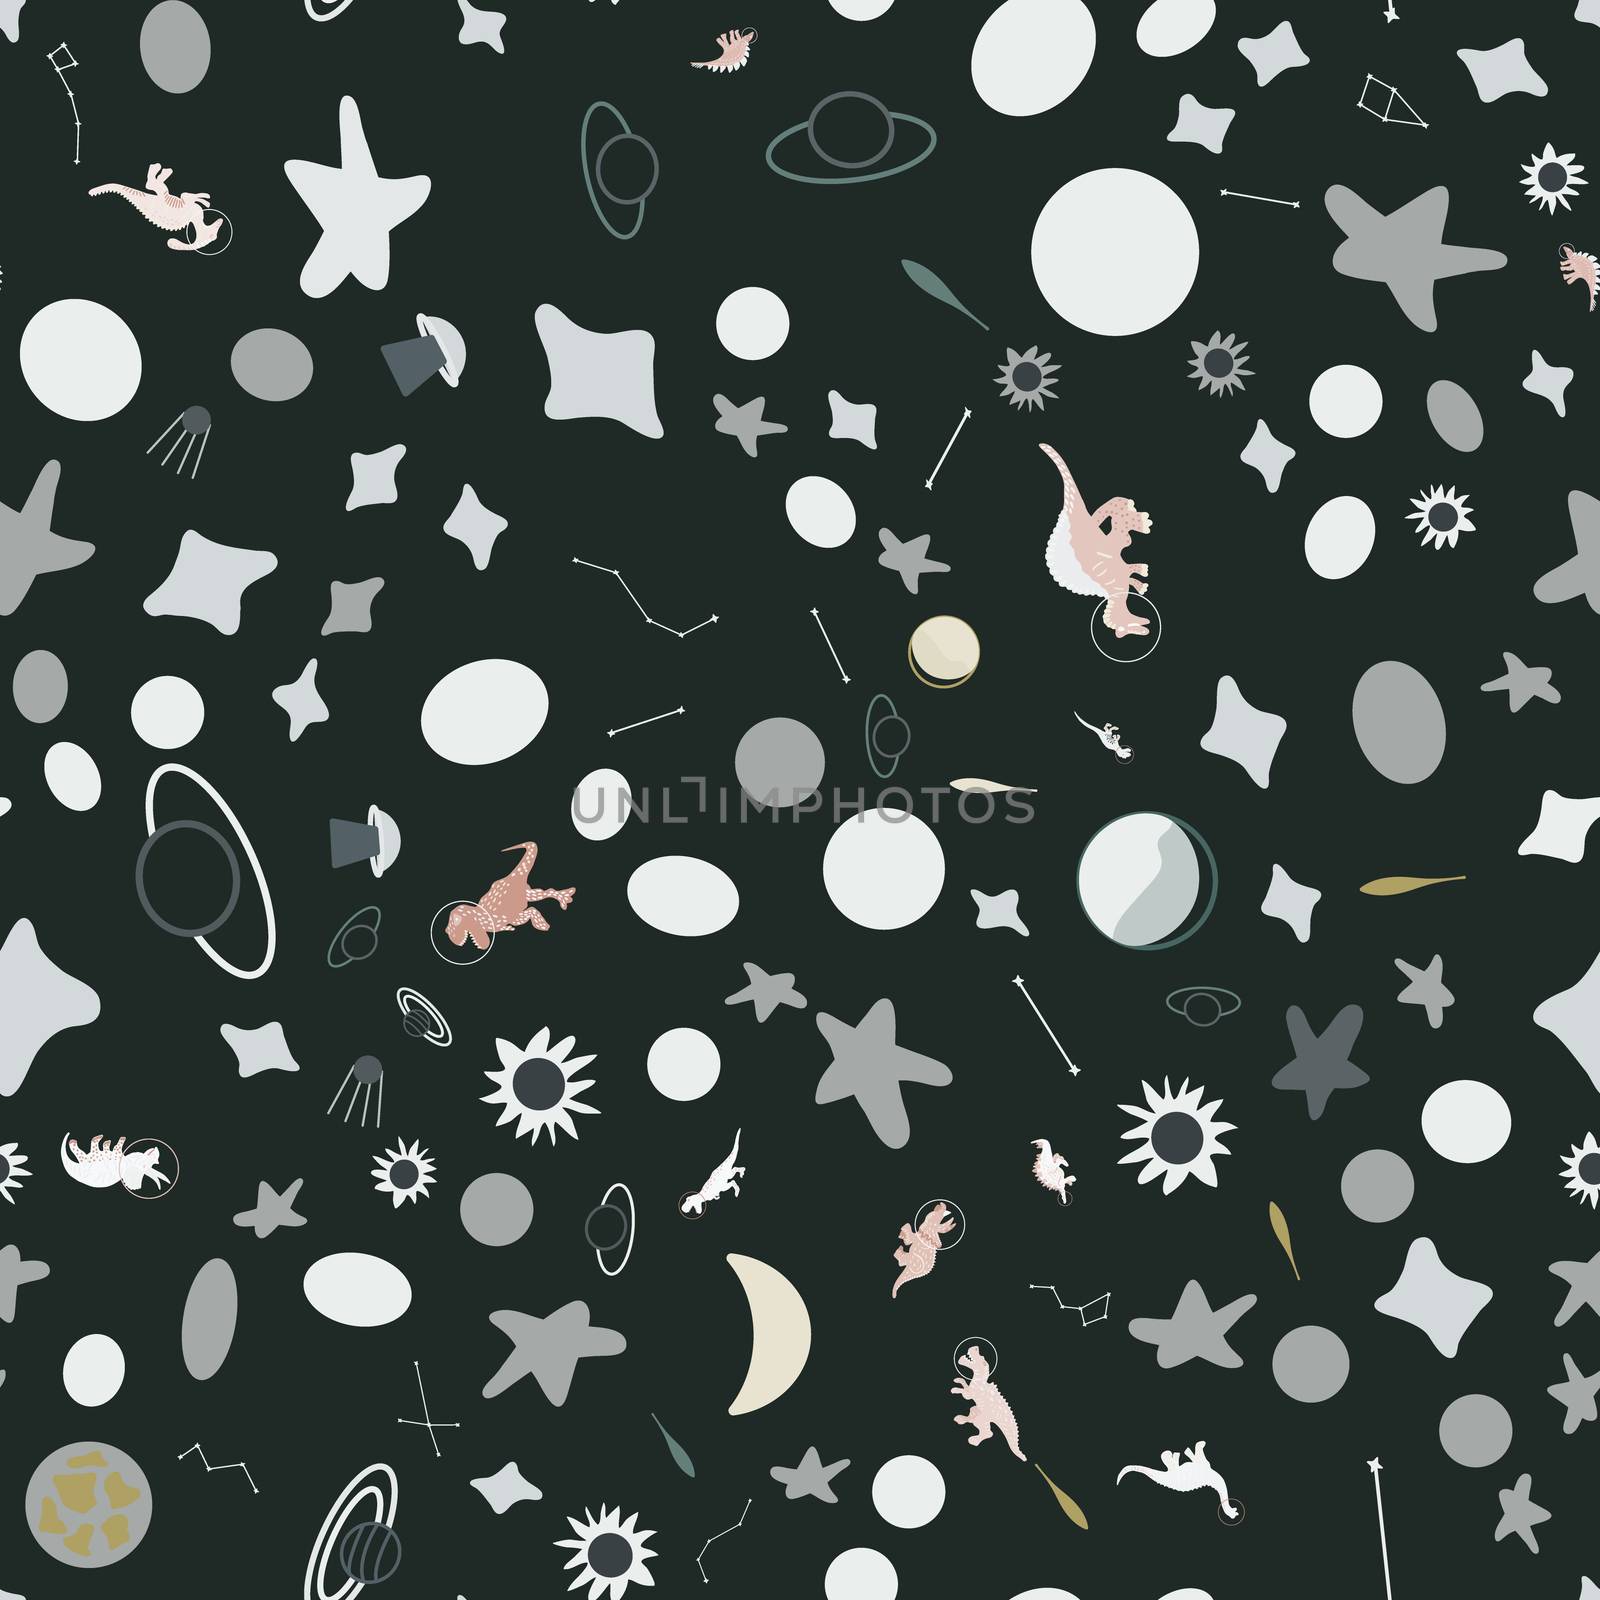 Space dino seamless pattern on black. Cute wild galaxy monster endless design. Joyous reptile astronaut and planets decor for textile, paper, web, wallpaper. Vector illustration in flat cartoon style.